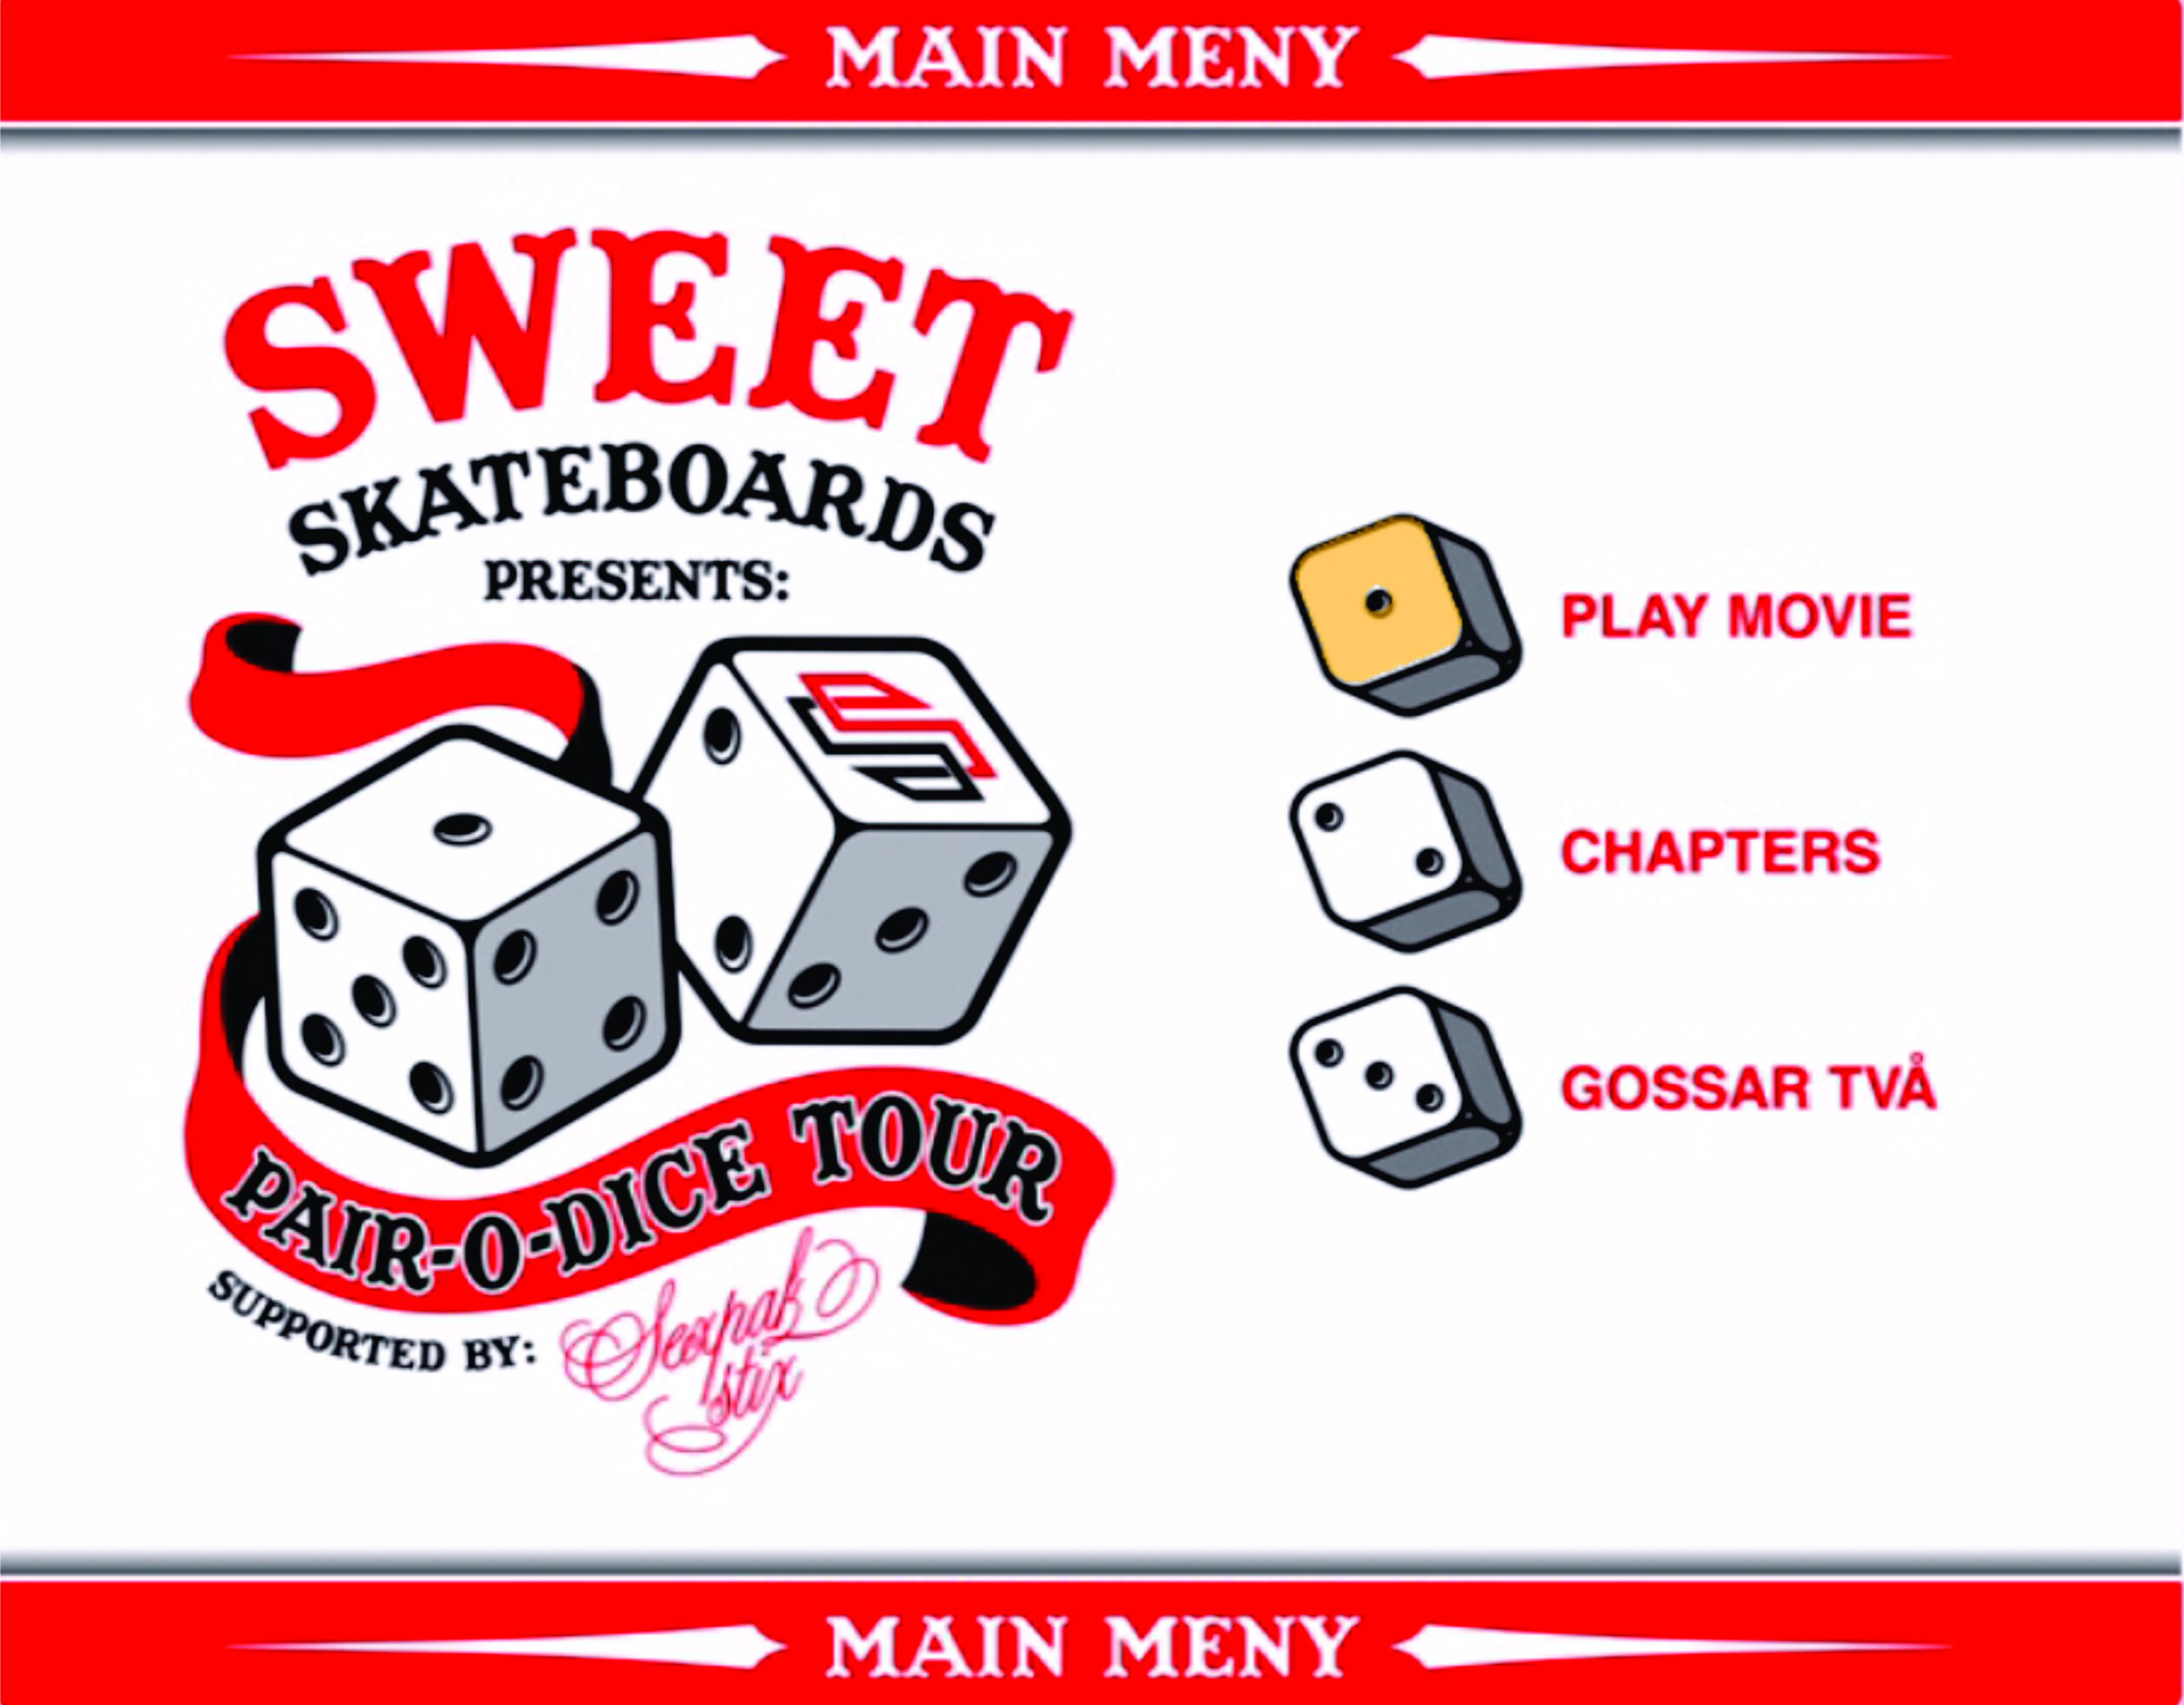 Sweet - Pair-O-Dice Tour cover